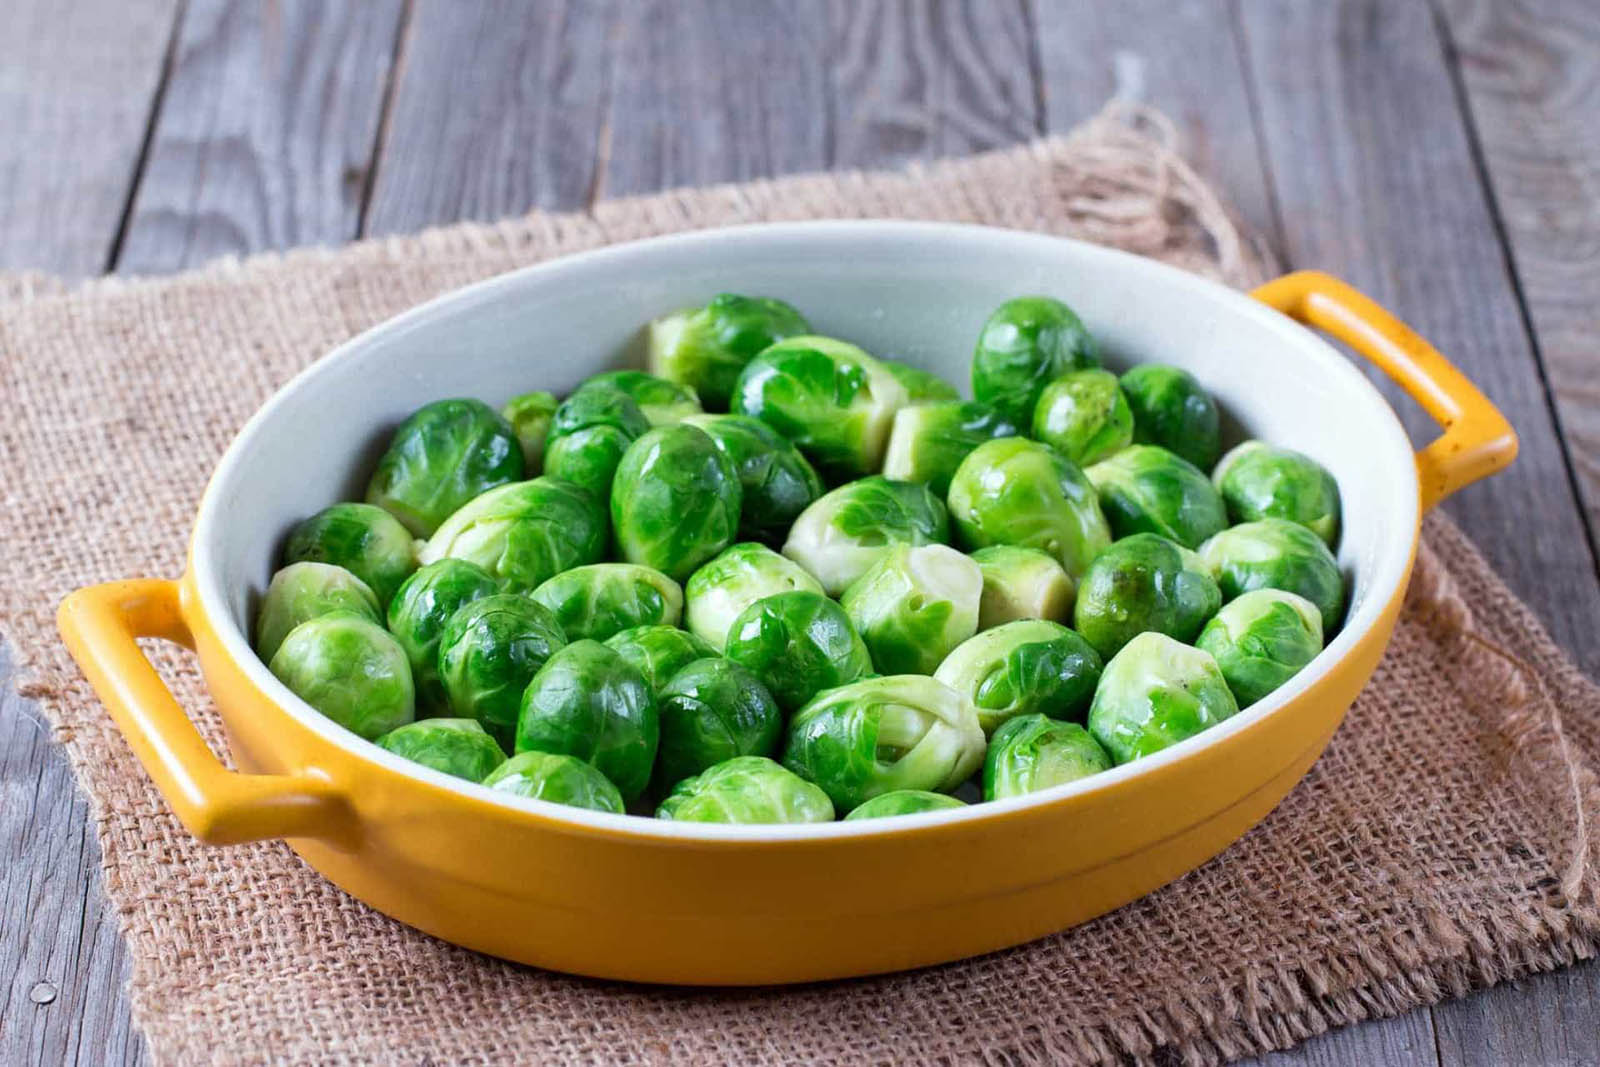 The Snacks You Love and the Veggies You Hate Will Determine Your Age With Alarming Accuracy Brussels sprouts